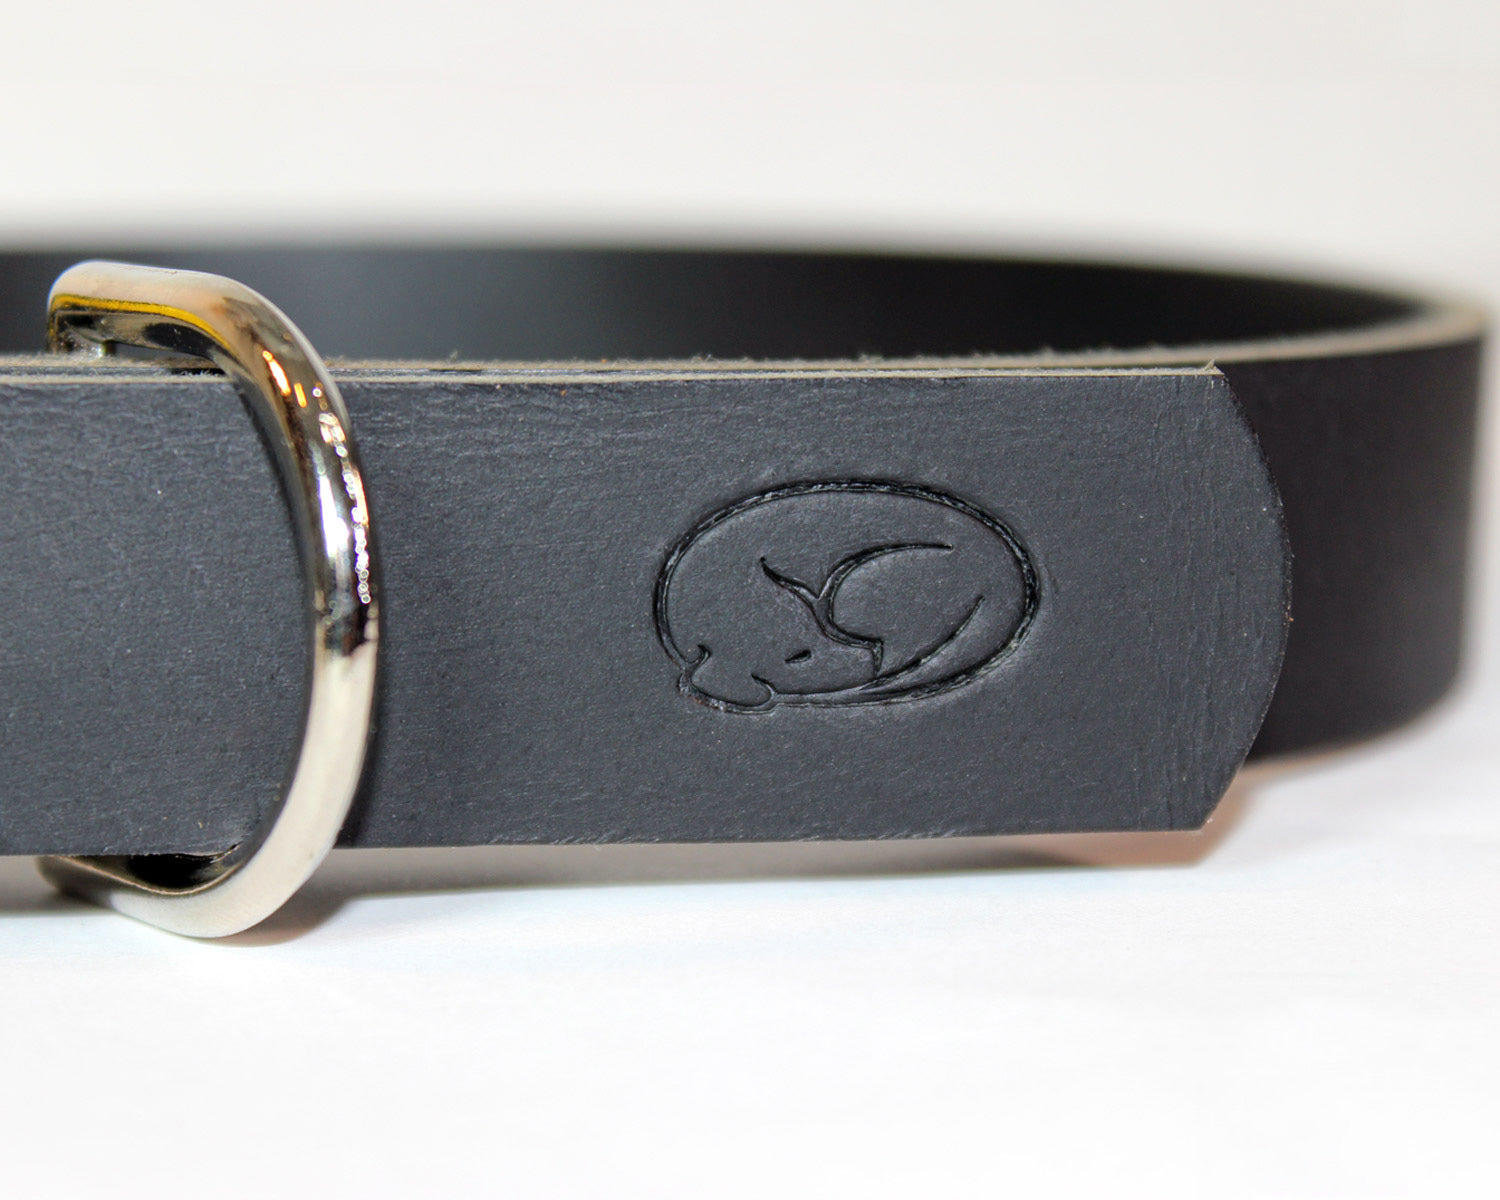 Black Thick Leather Dog Collar